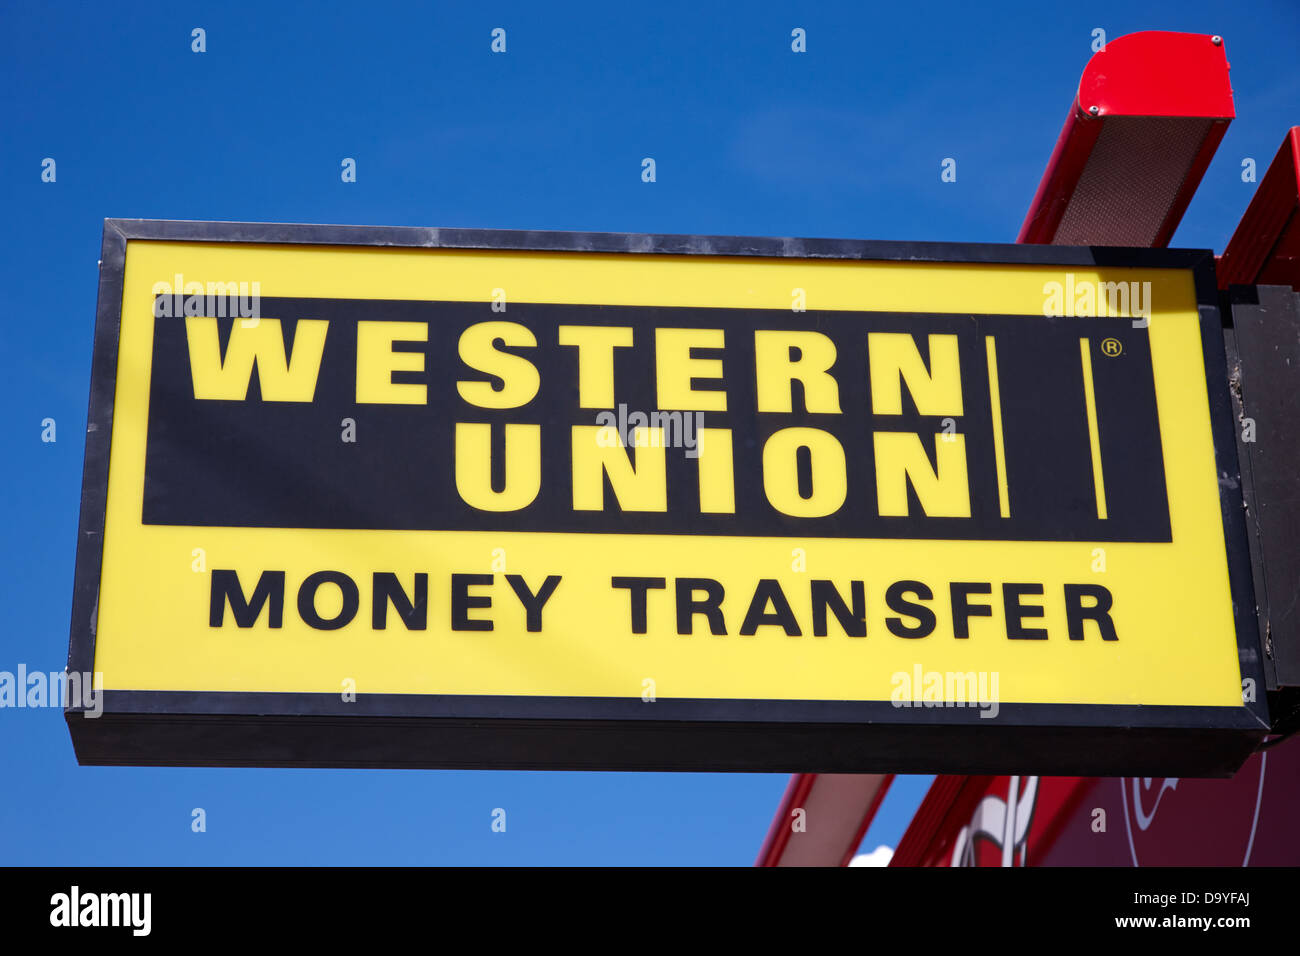 western union money transfer sign in the uk Stock Photo